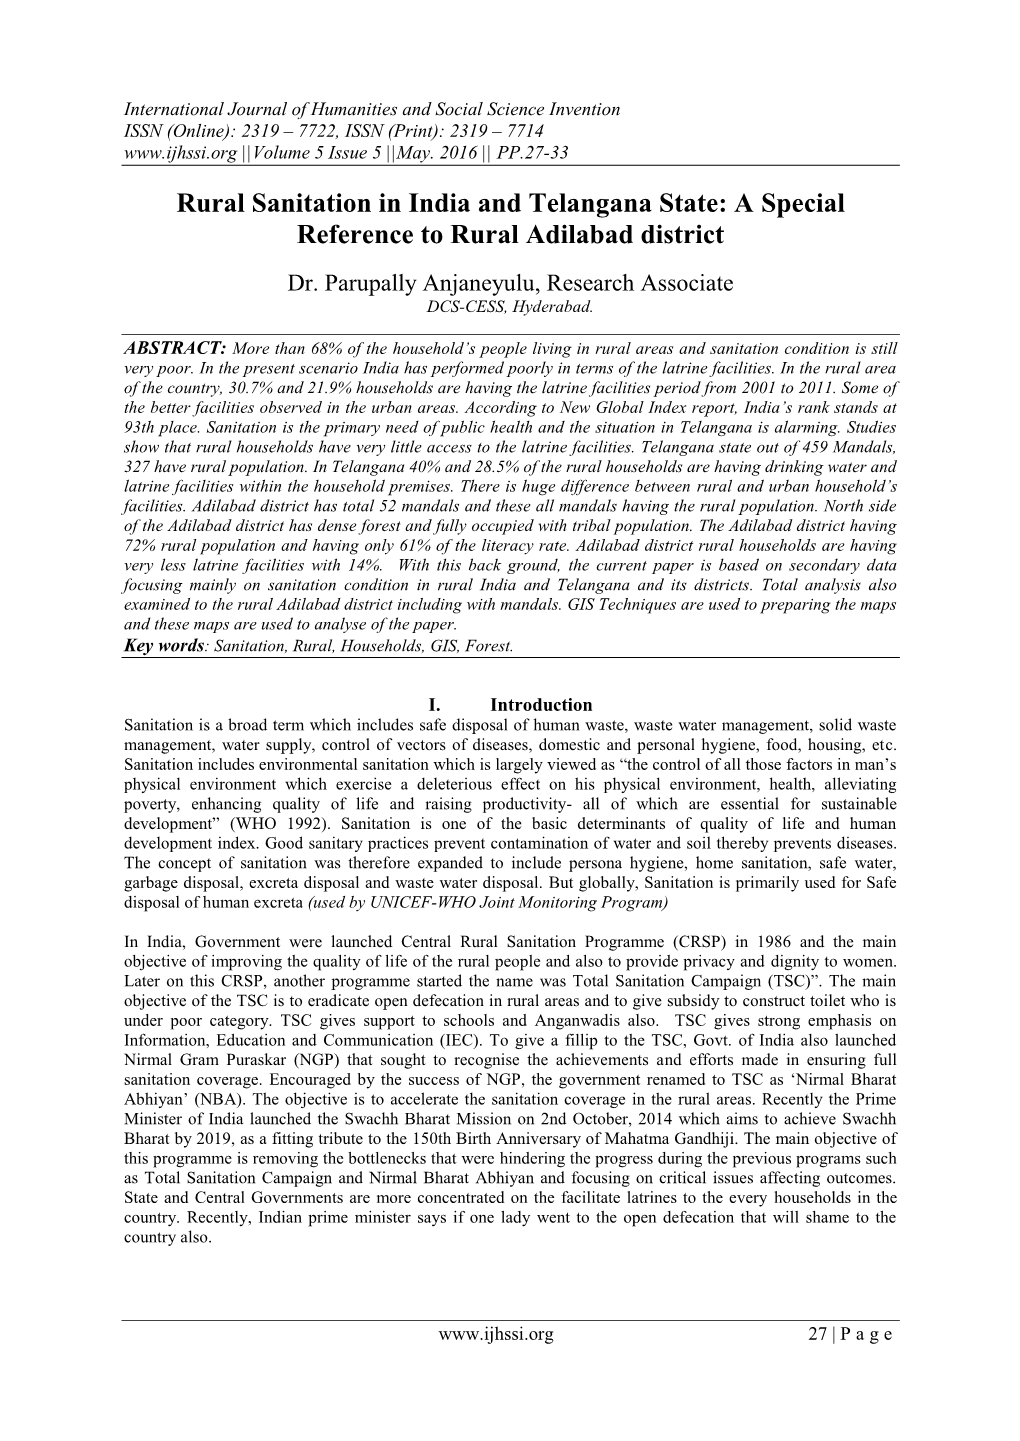 Rural Sanitation in India and Telangana State: a Special Reference to Rural Adilabad District